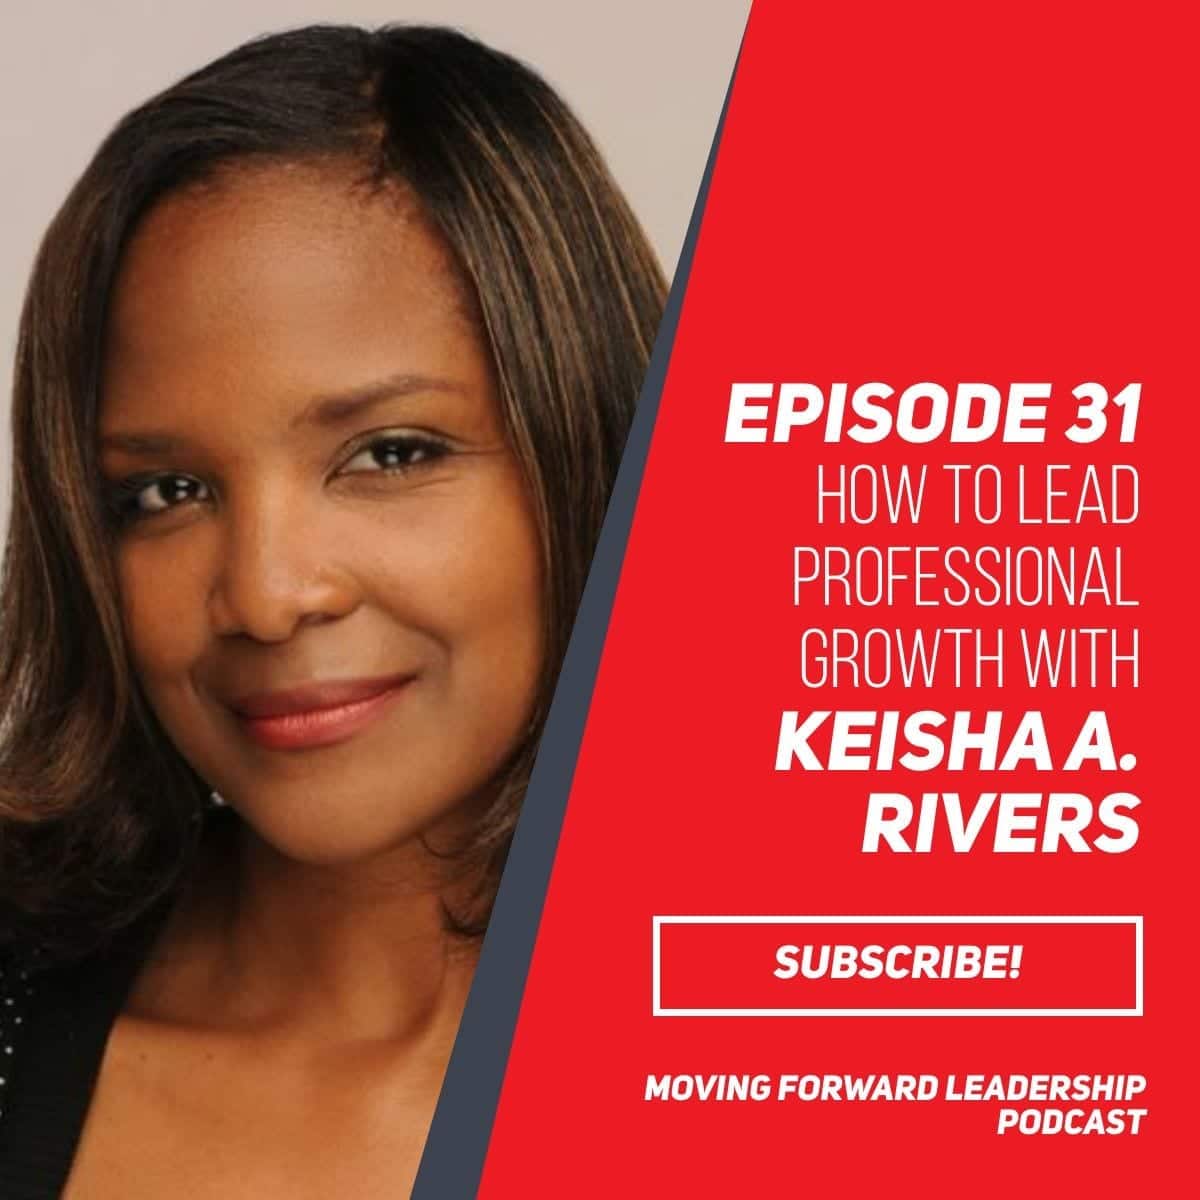 How to Lead Professional Growth | Keisha A. Rivers | Episode 31